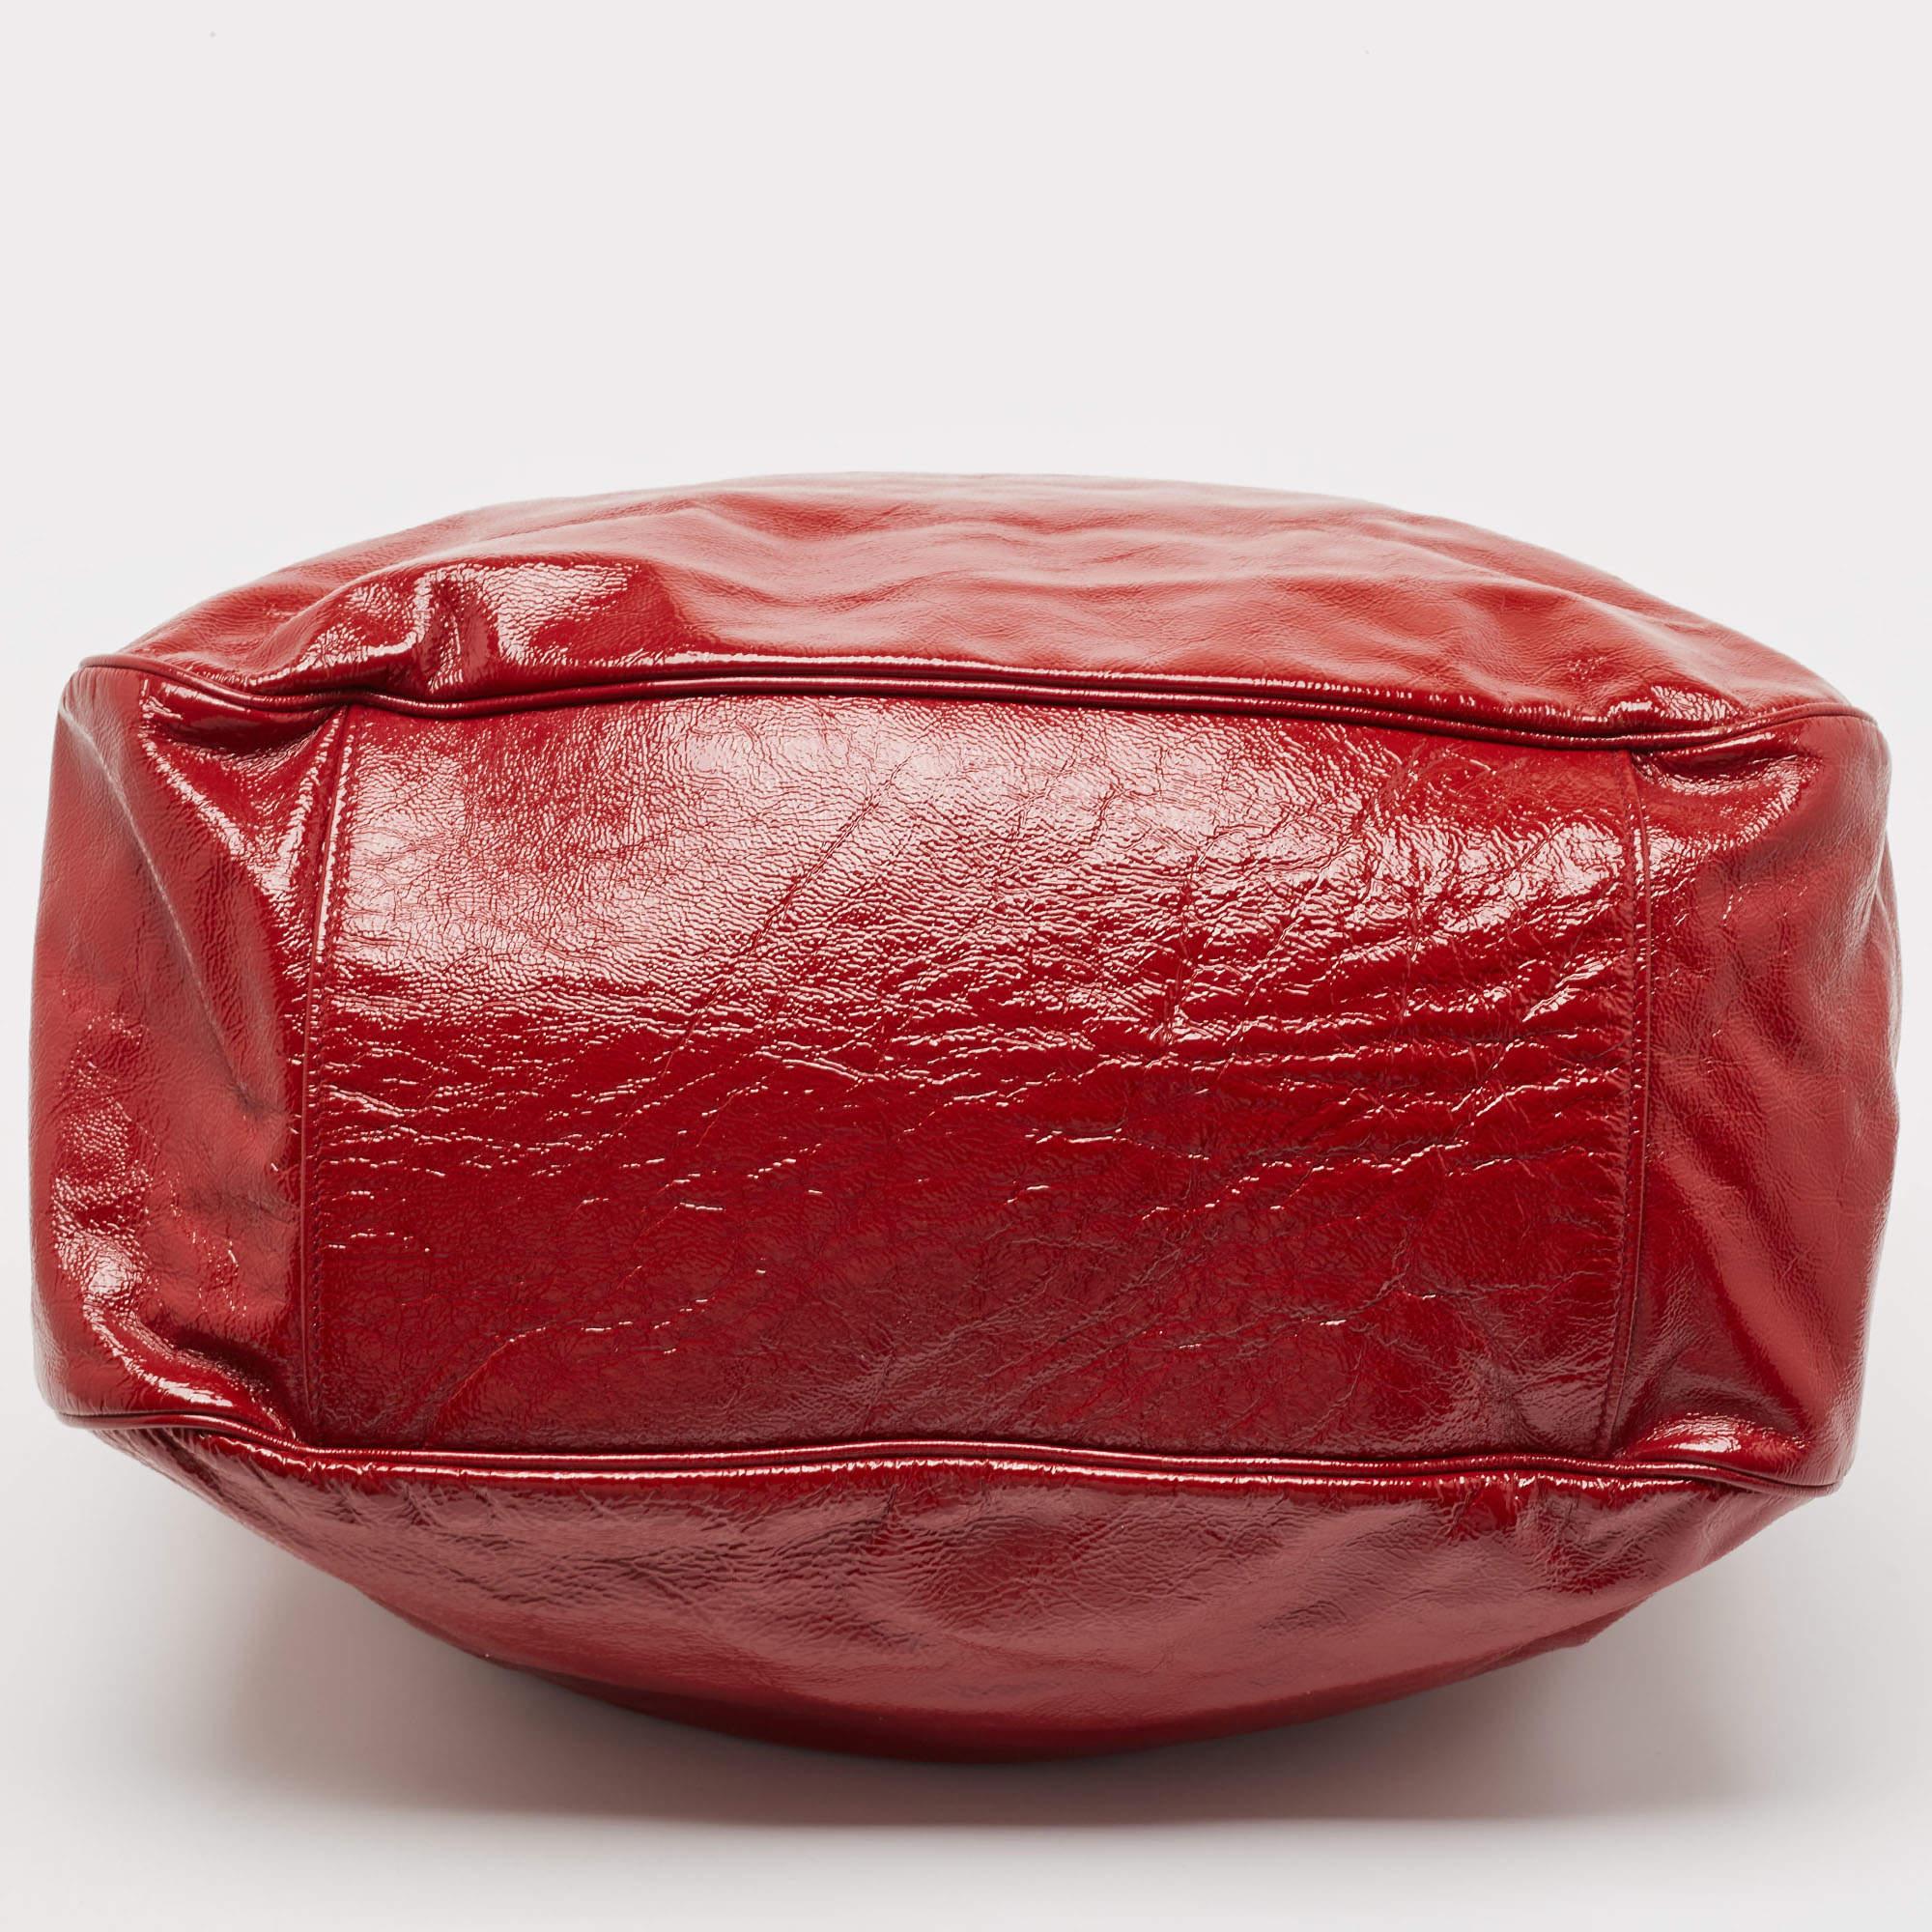 Women's Yves Saint Laurent Red Patent Leather Roady Hobo